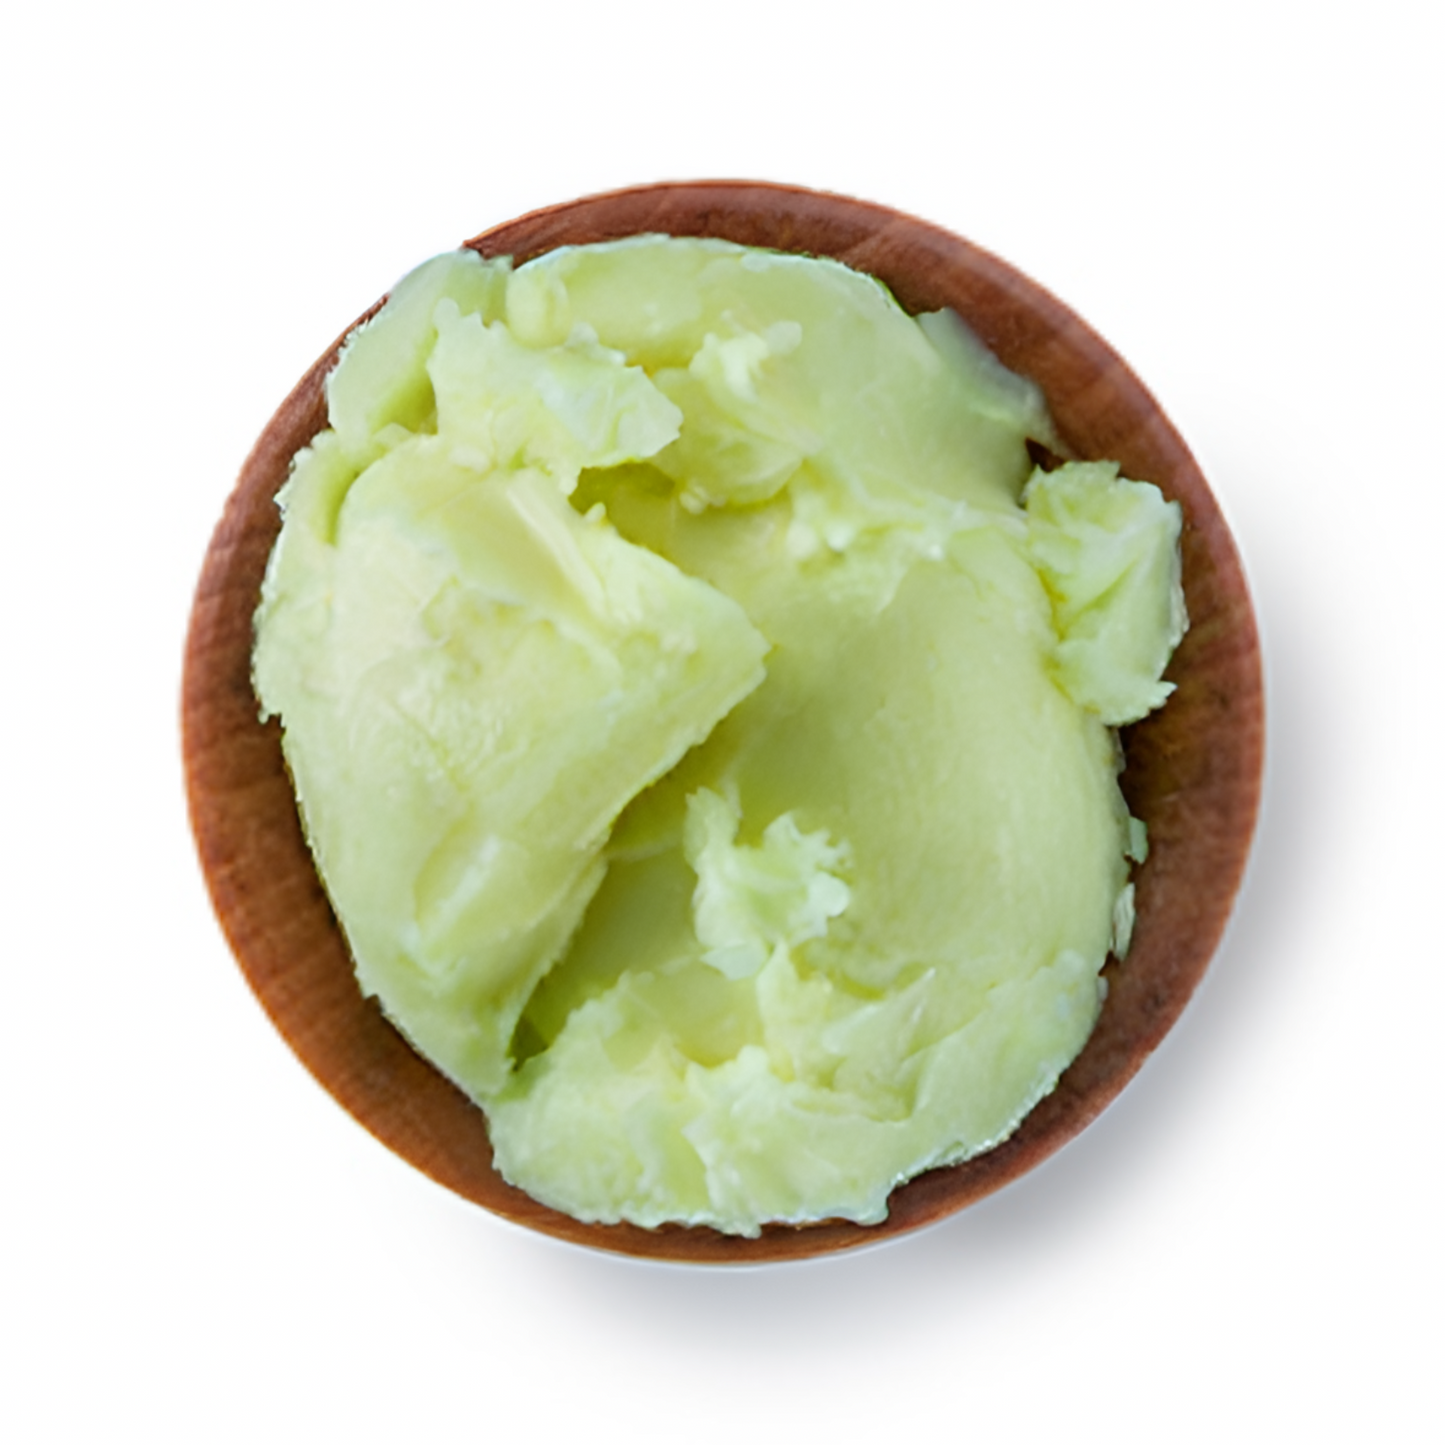 Avocado butter unrefed cosmetic grade â the art connect